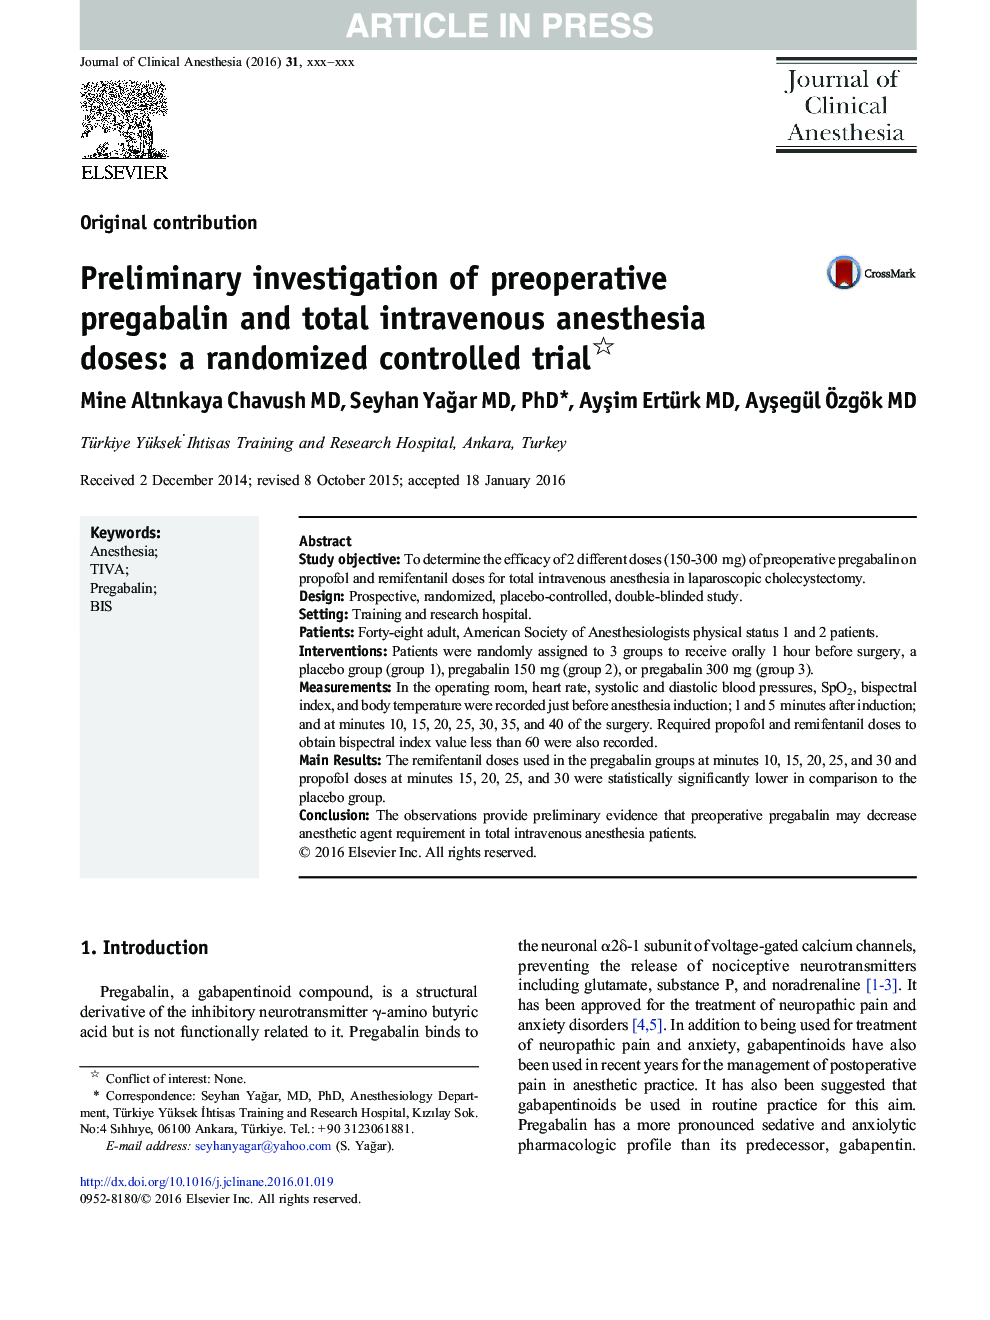 Preliminary investigation of preoperative pregabalin and total intravenous anesthesia doses: a randomized controlled trial